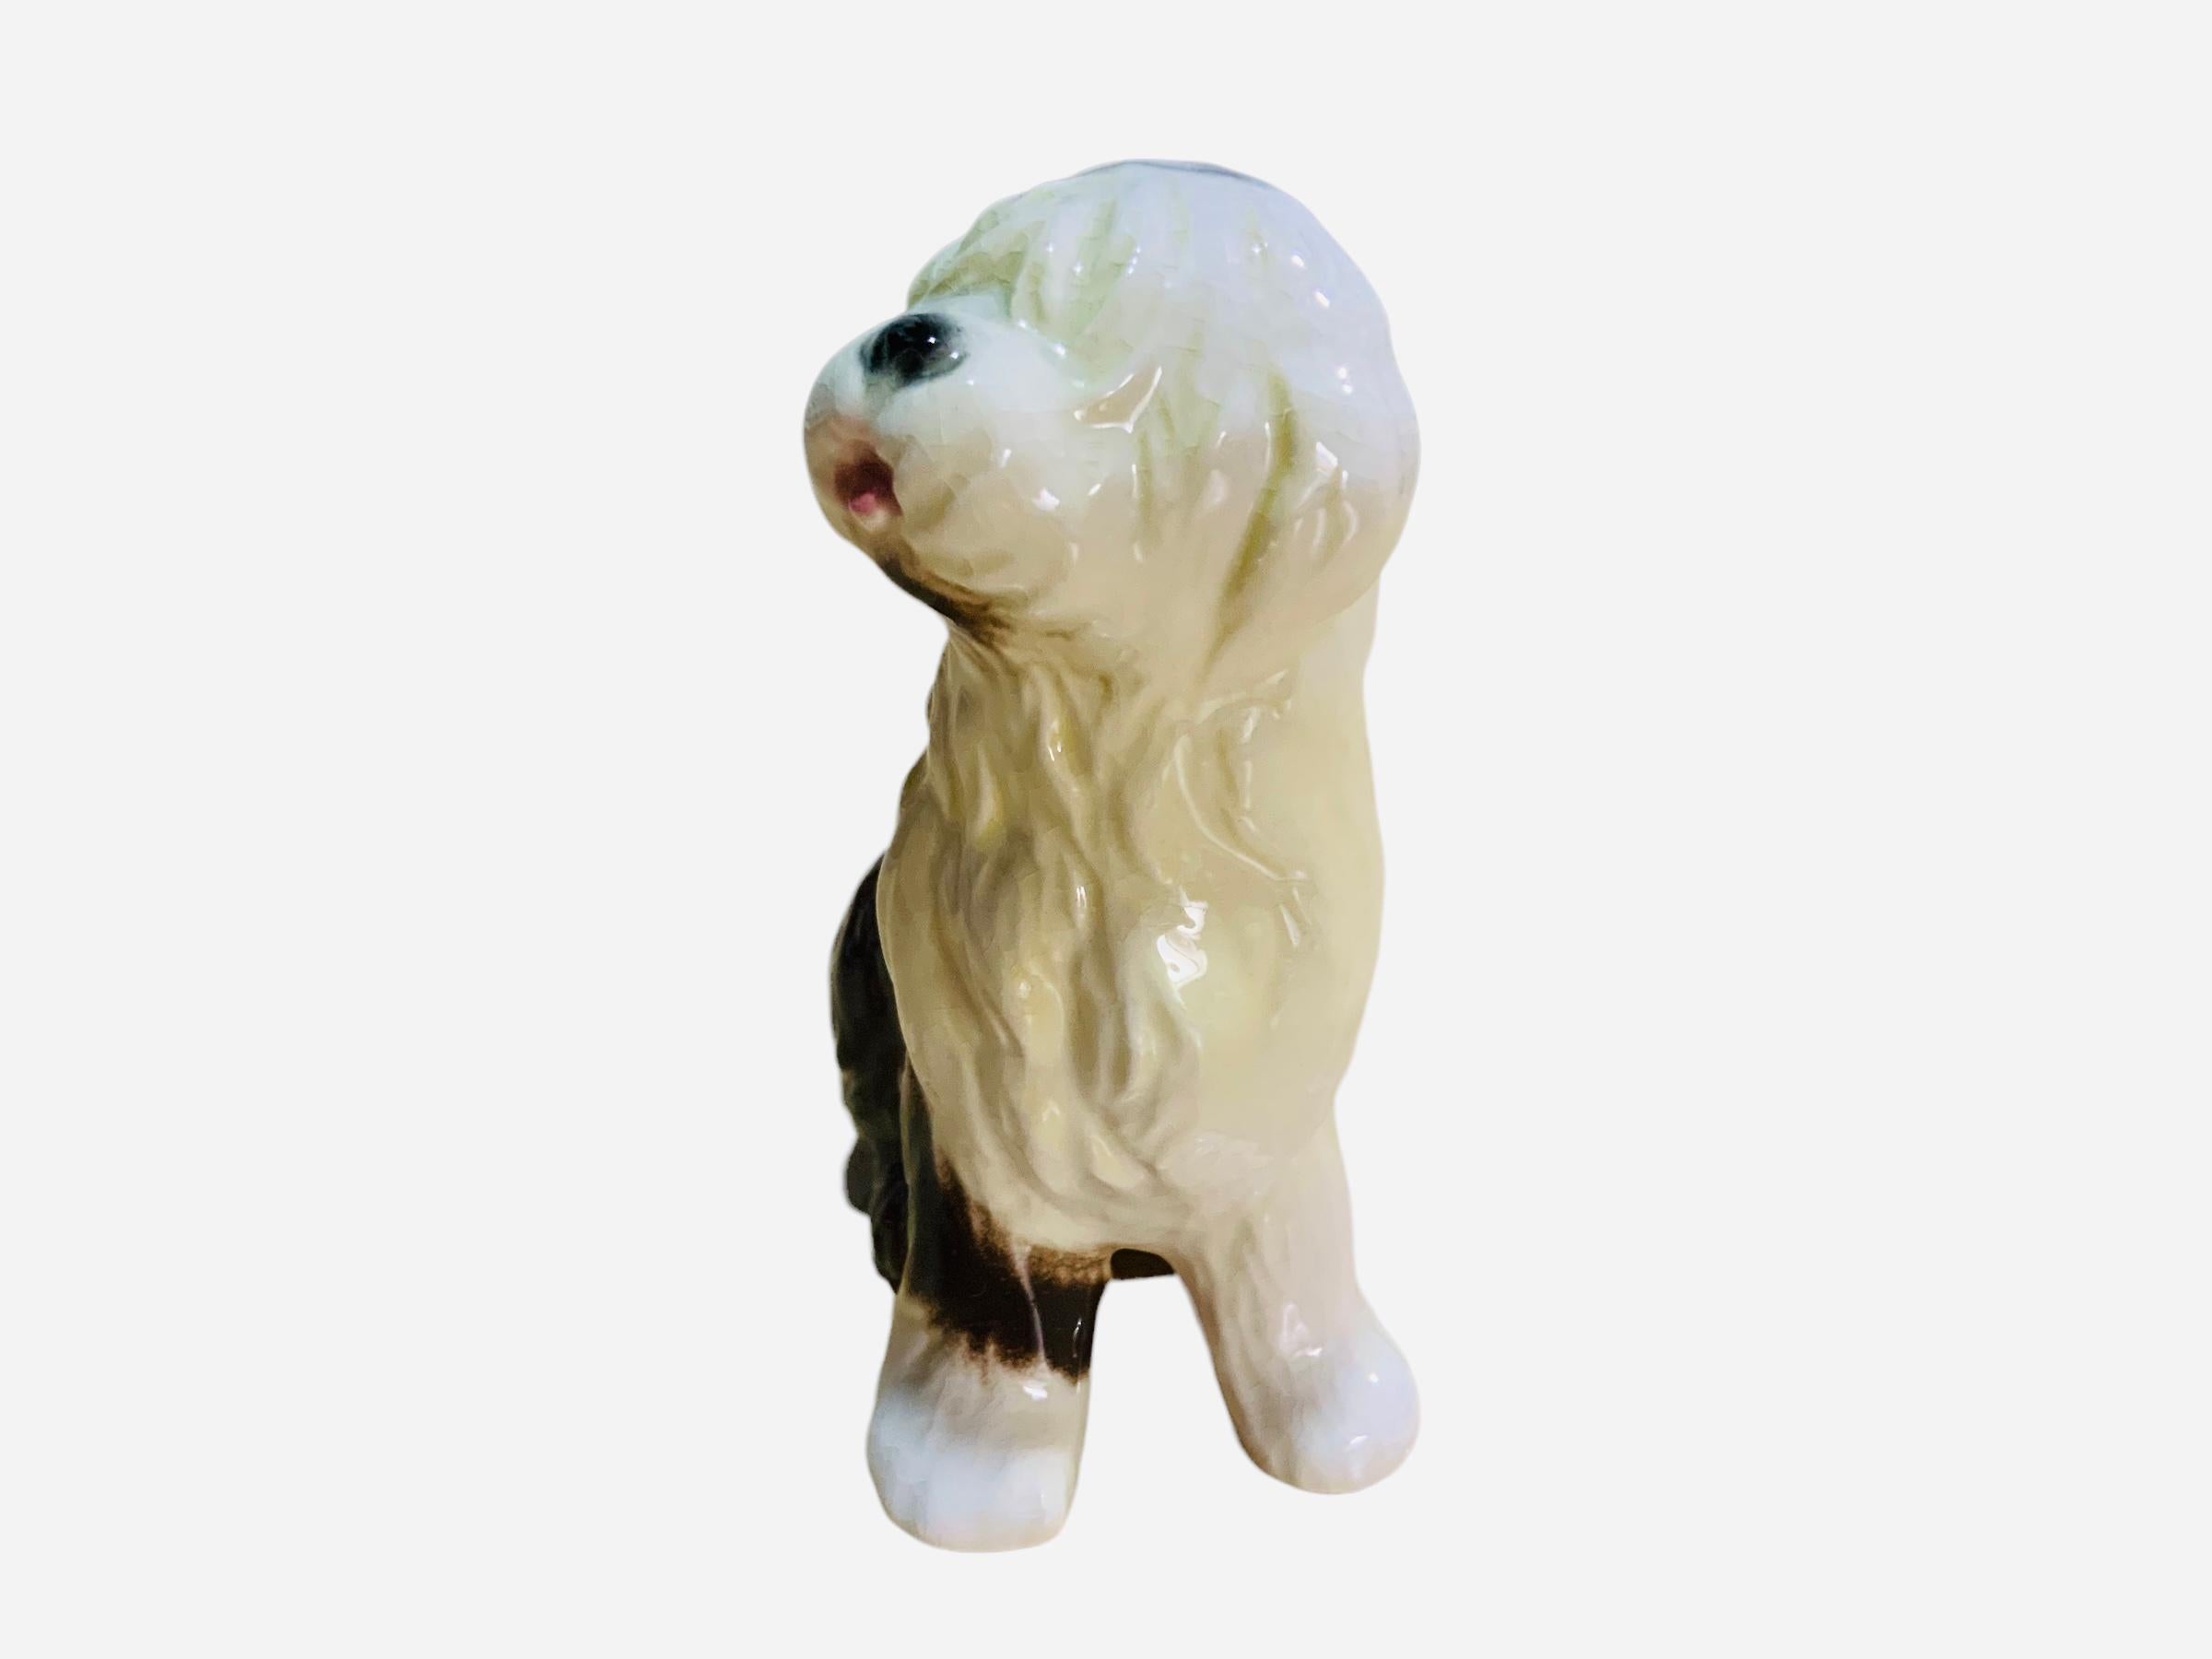 Goeble Porcelain Figurine of an Old English Sheep Dog In Good Condition For Sale In Guaynabo, PR